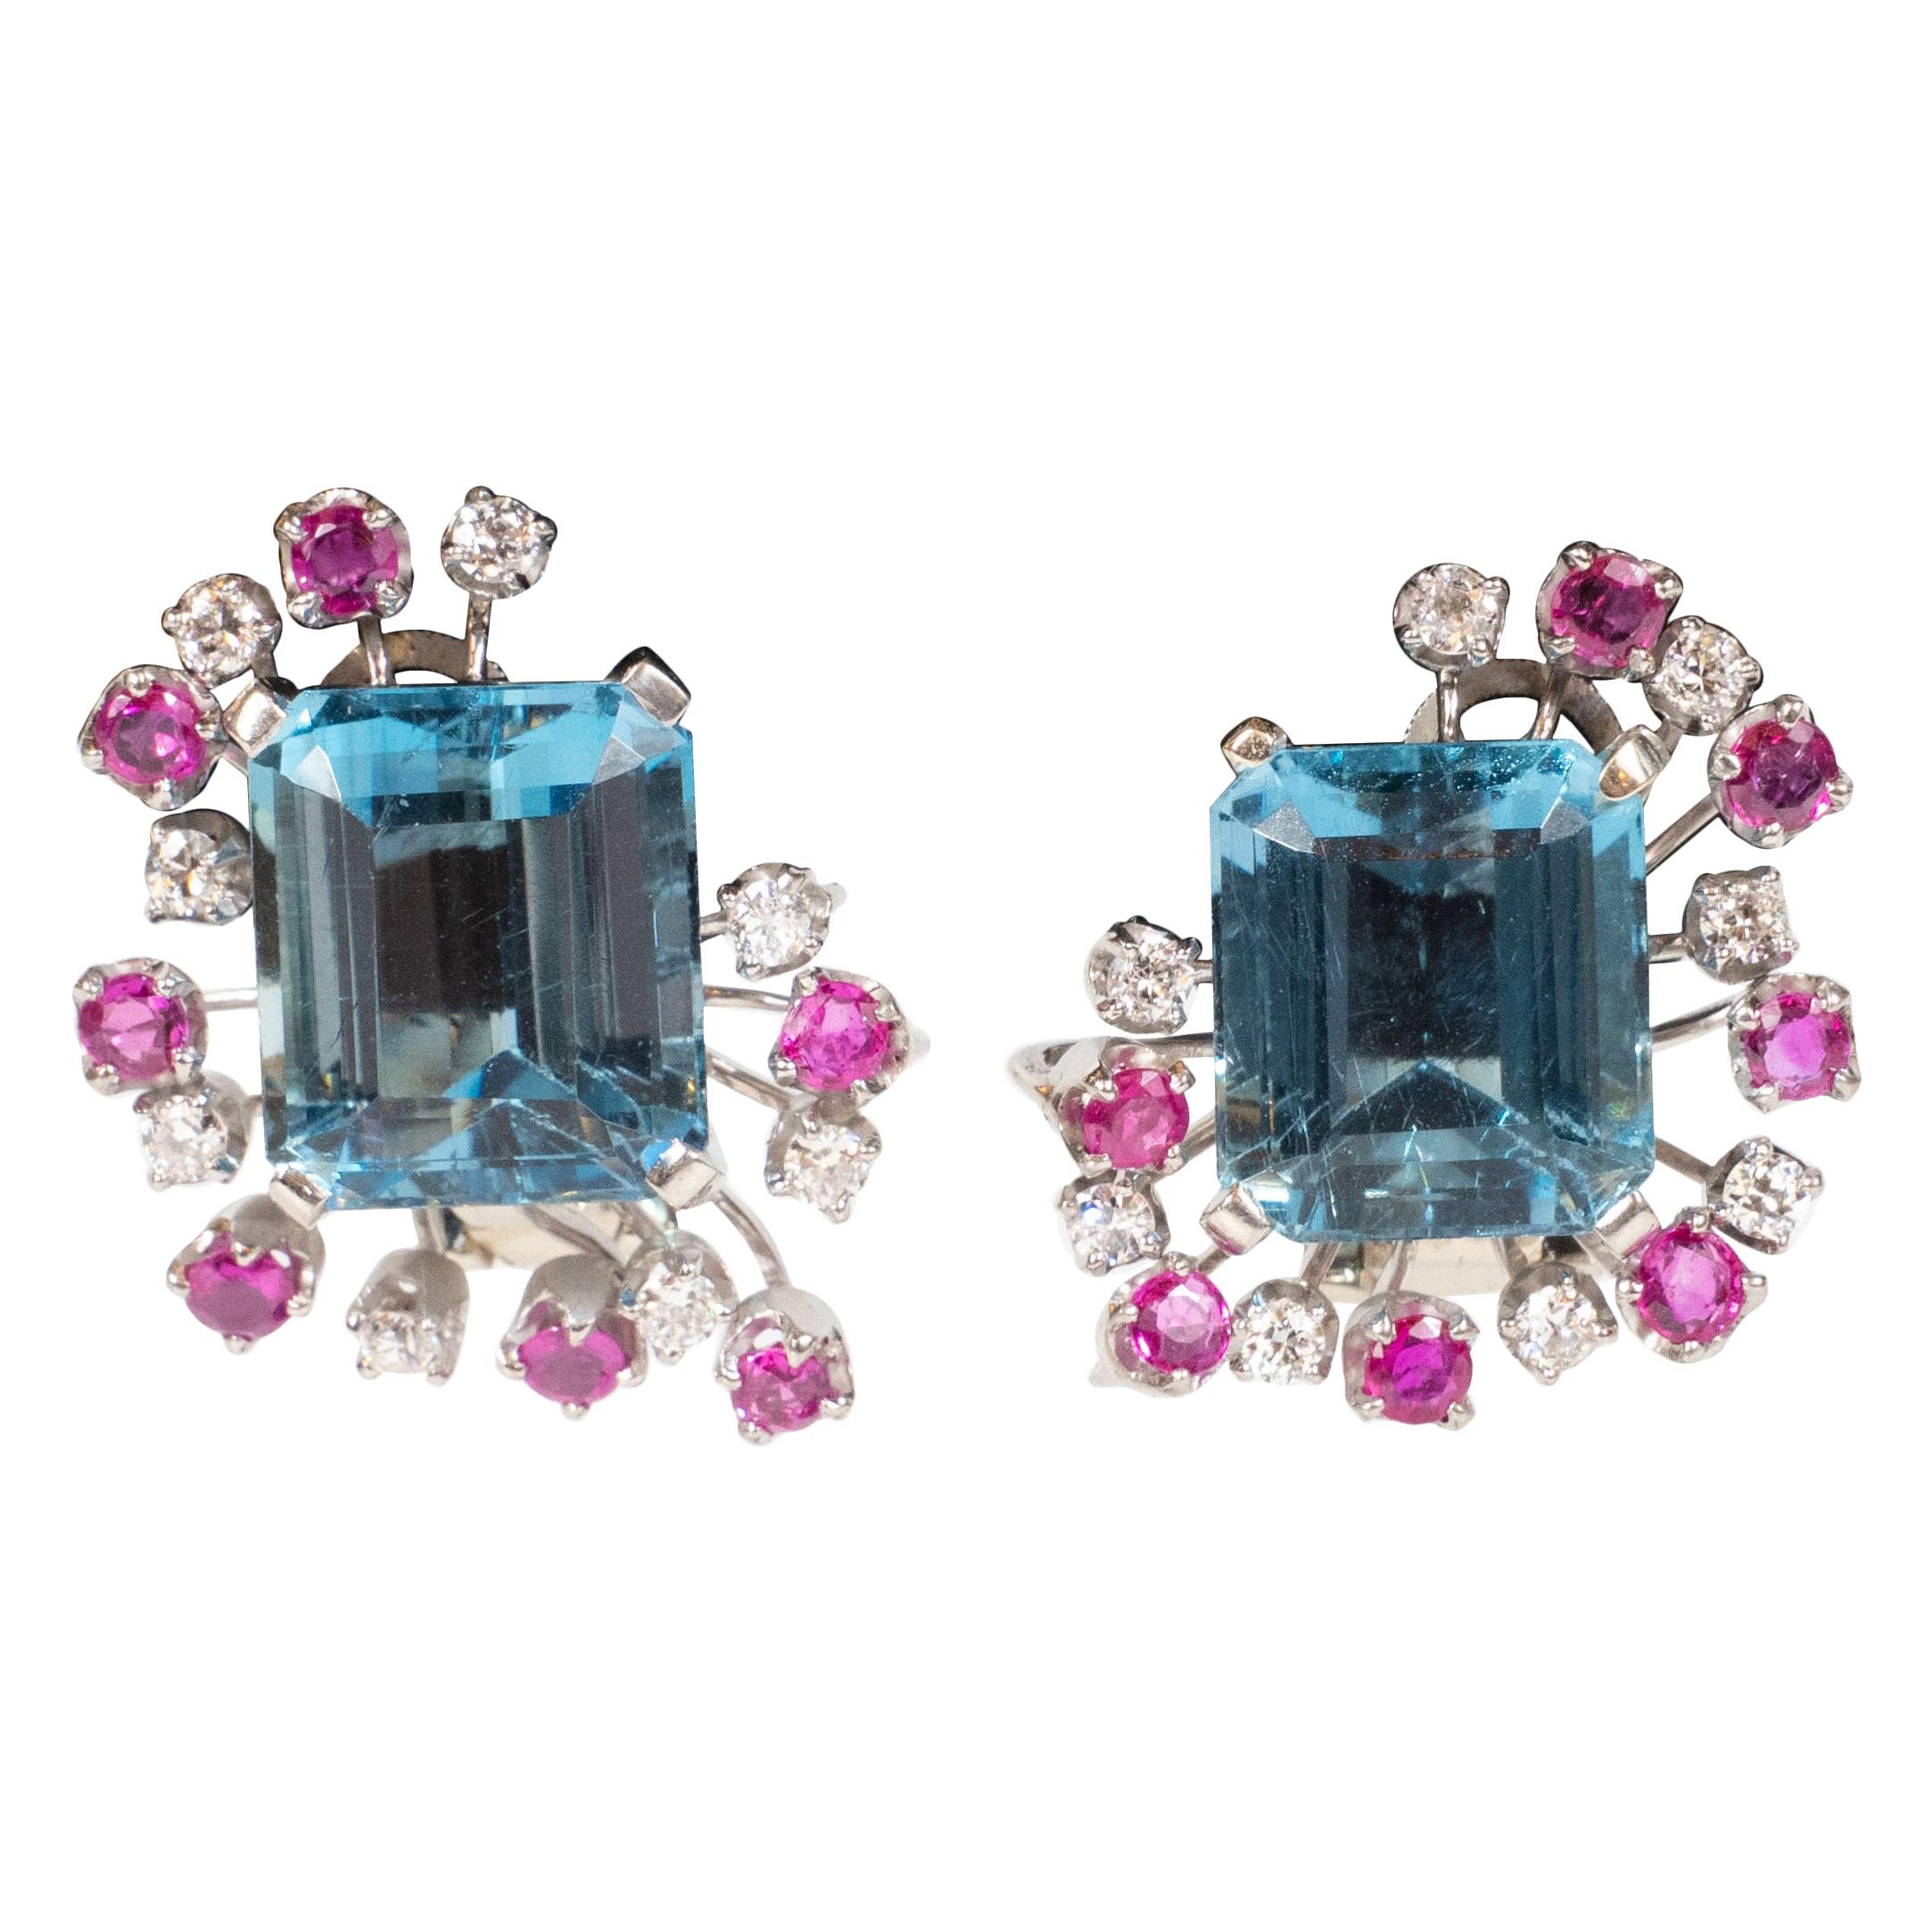 This stunning pair of retro earrings were realized in the United States, circa 1940. They offer 12 carats of aquamarine (6ct in each), surrounded by a cluster of alternating rubies and diamonds, all set in platinum. Additionally, they have 1.45